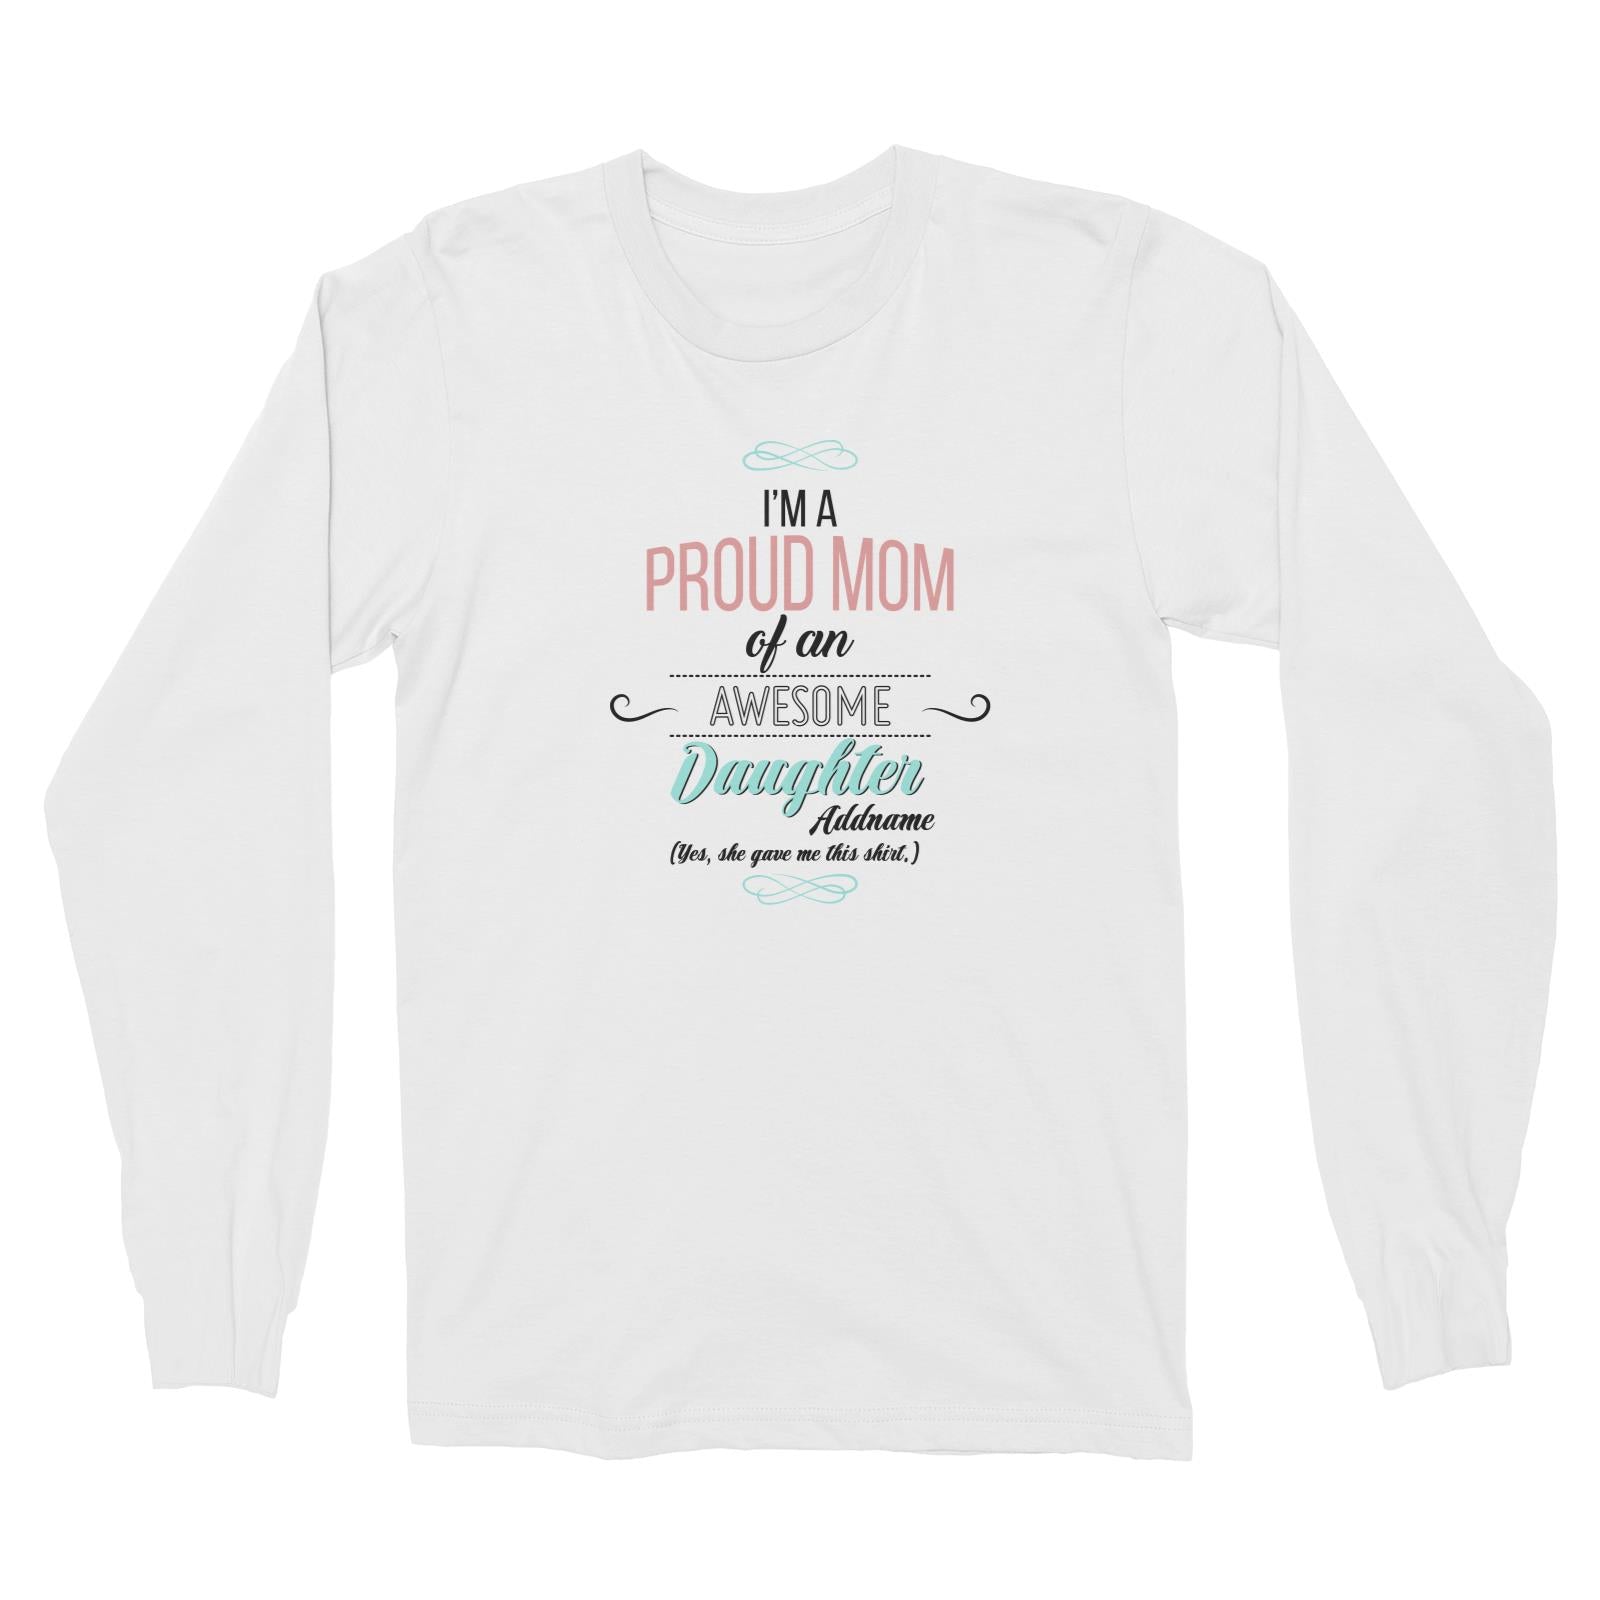 I'm A Proud Mom Of An Awesome Daughter Personalizable with Name Long Sleeve Unisex T-Shirt